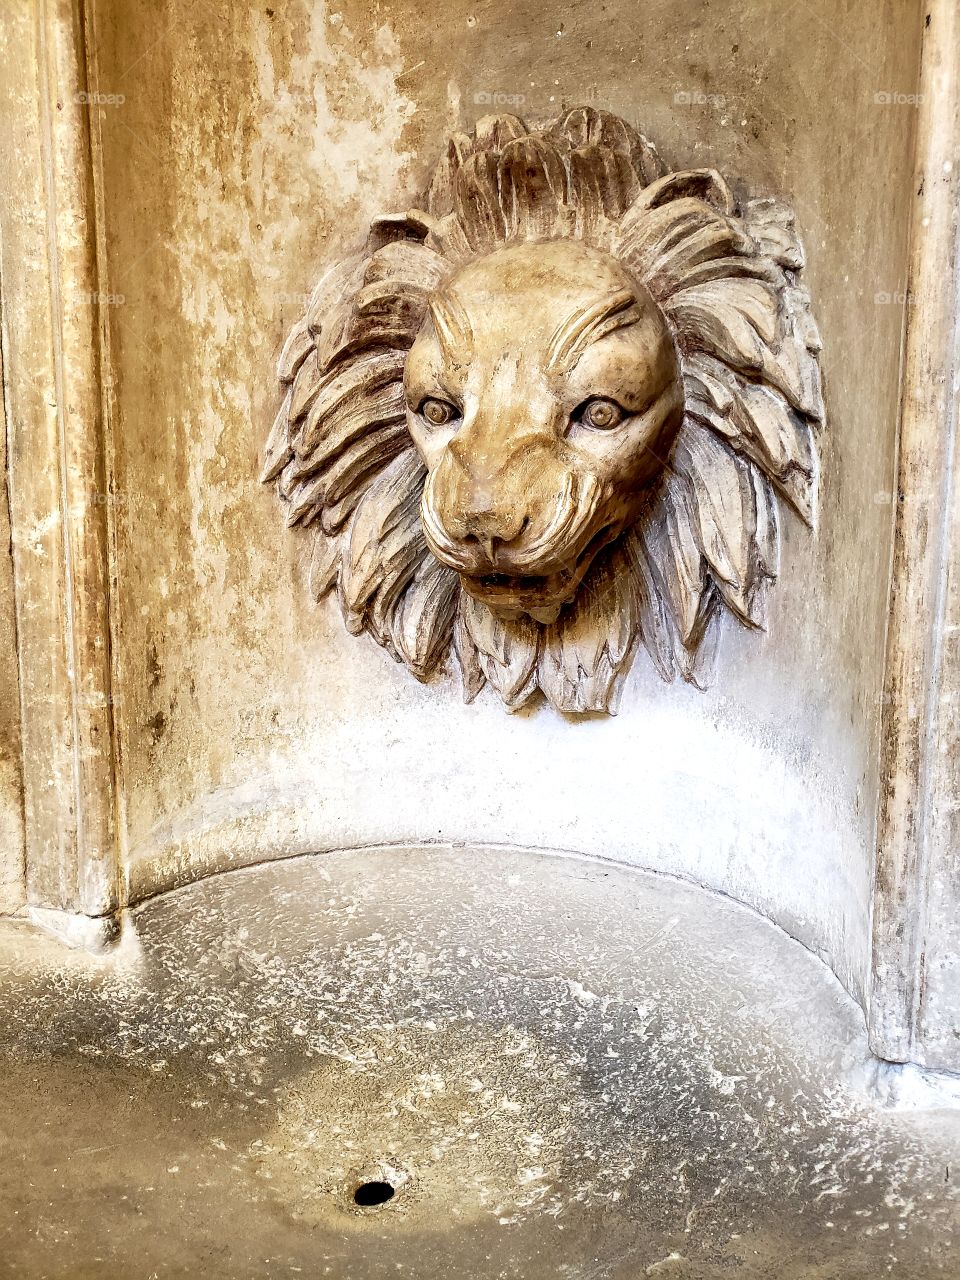 Lion water fountain, Old Water Tower, Chicago, Illinois